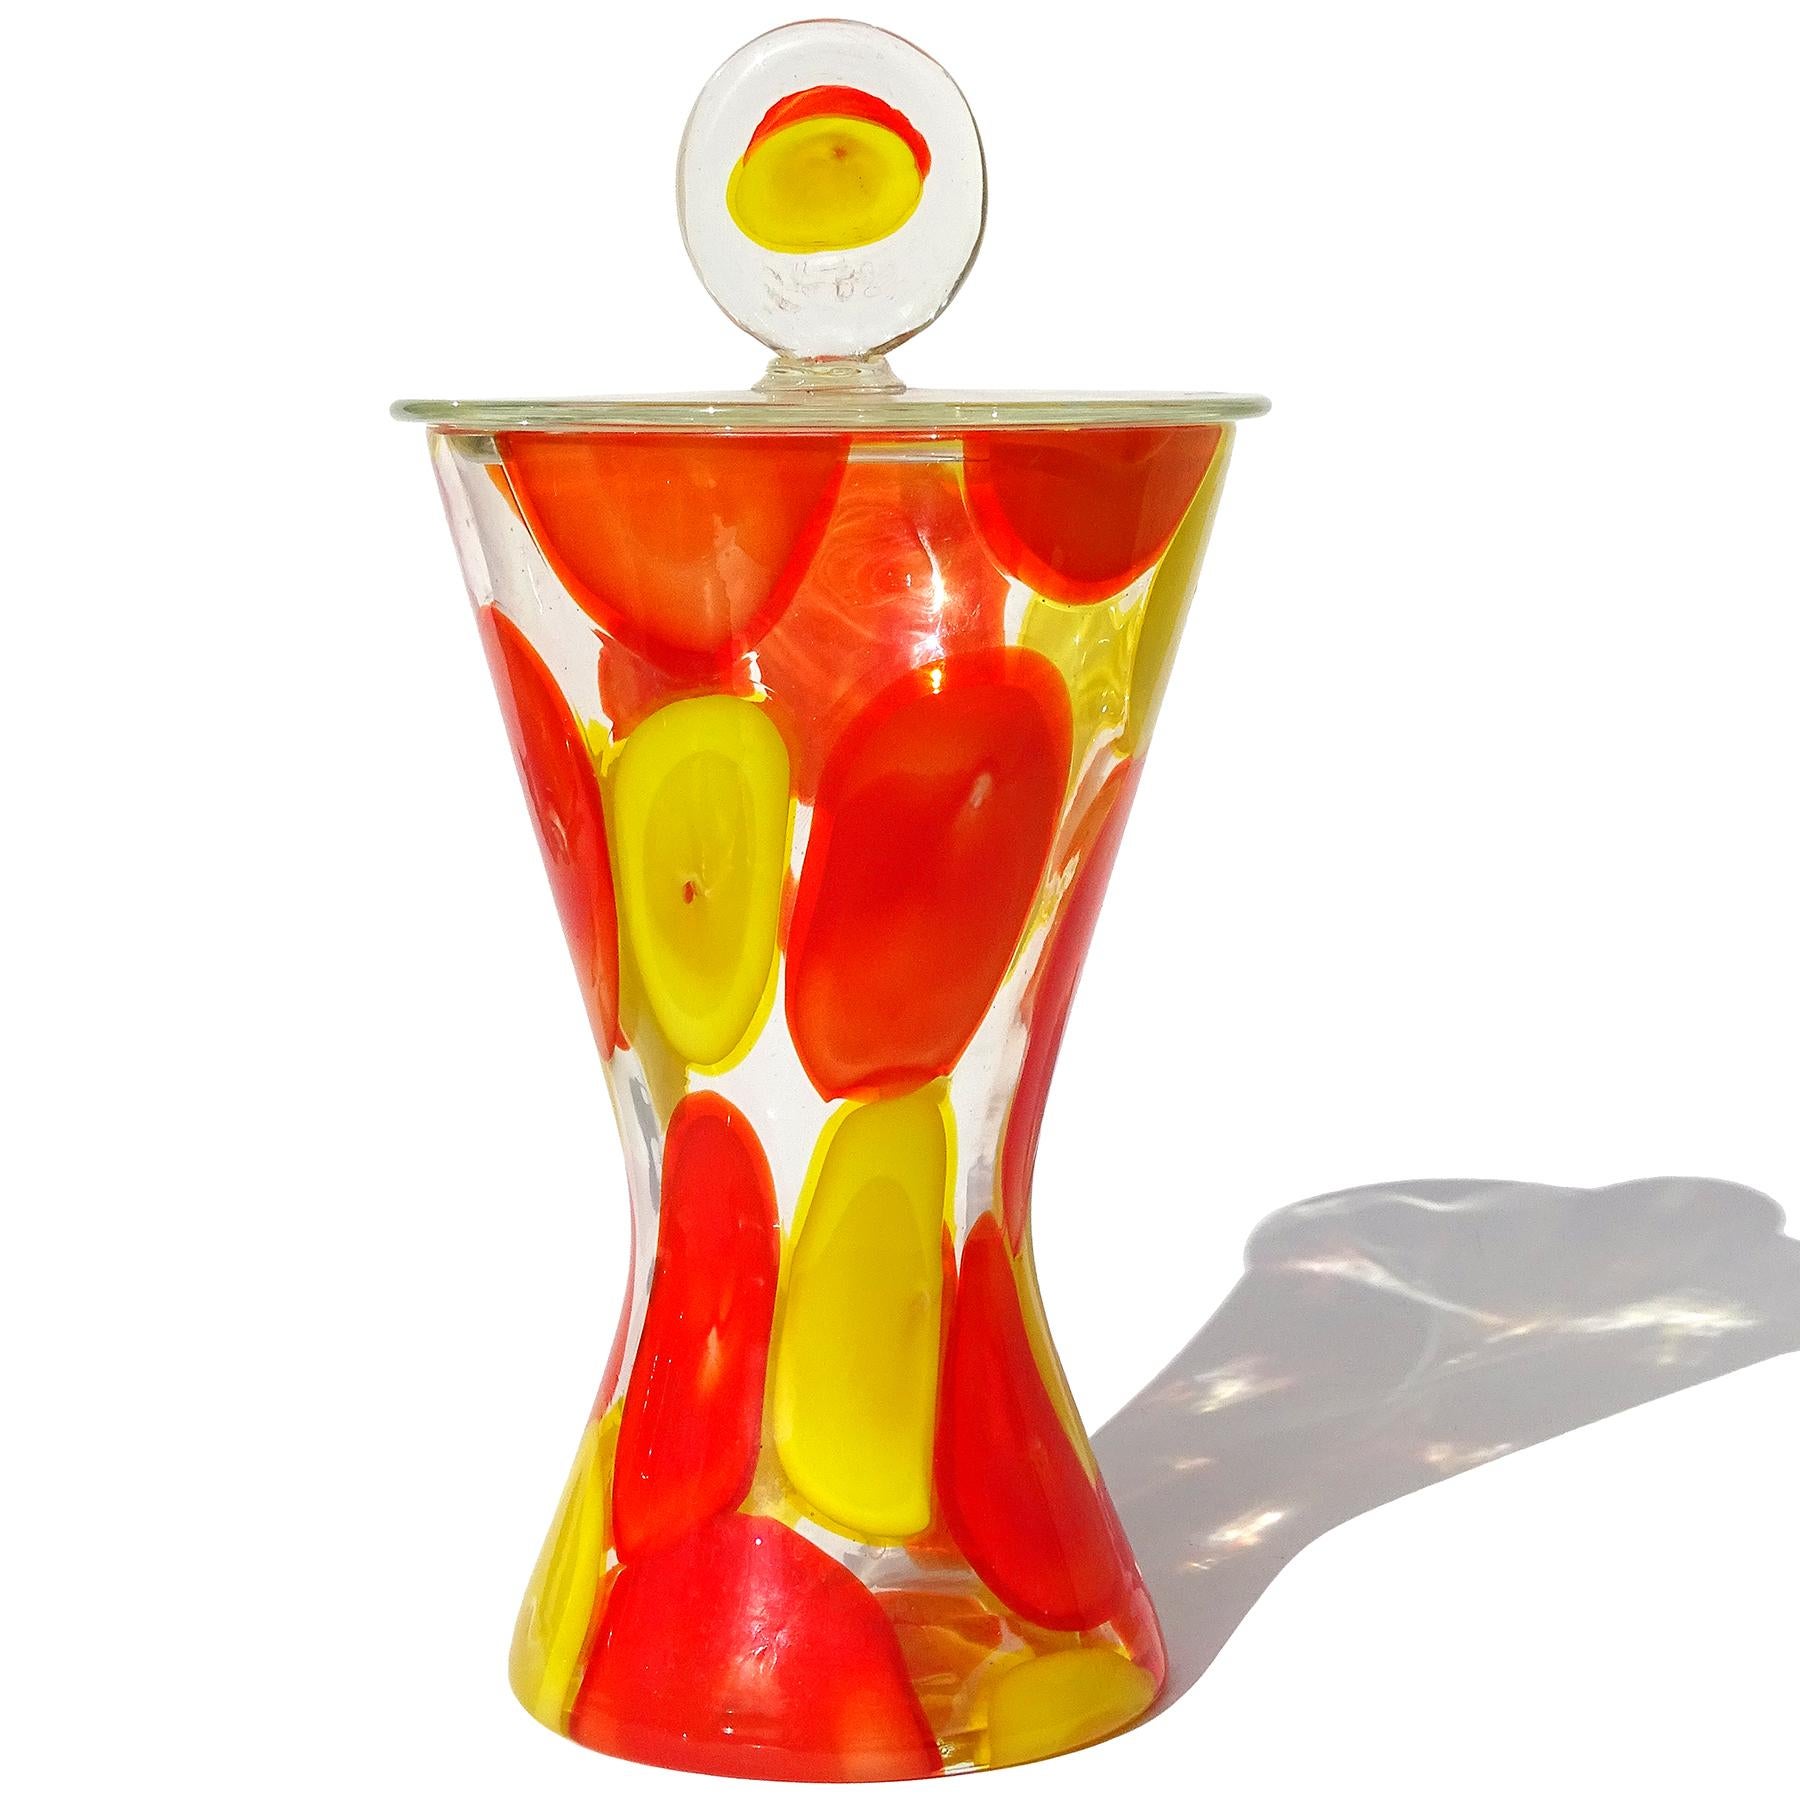 Beautiful and very rare Murano hand blown bright orange and yellow spots Italian art glass lidded candy jar / container. Documented to designer Ermanno Toso for the Fratelli Toso company, circa 1962. Published in the Fratelli Toso book (see photo).